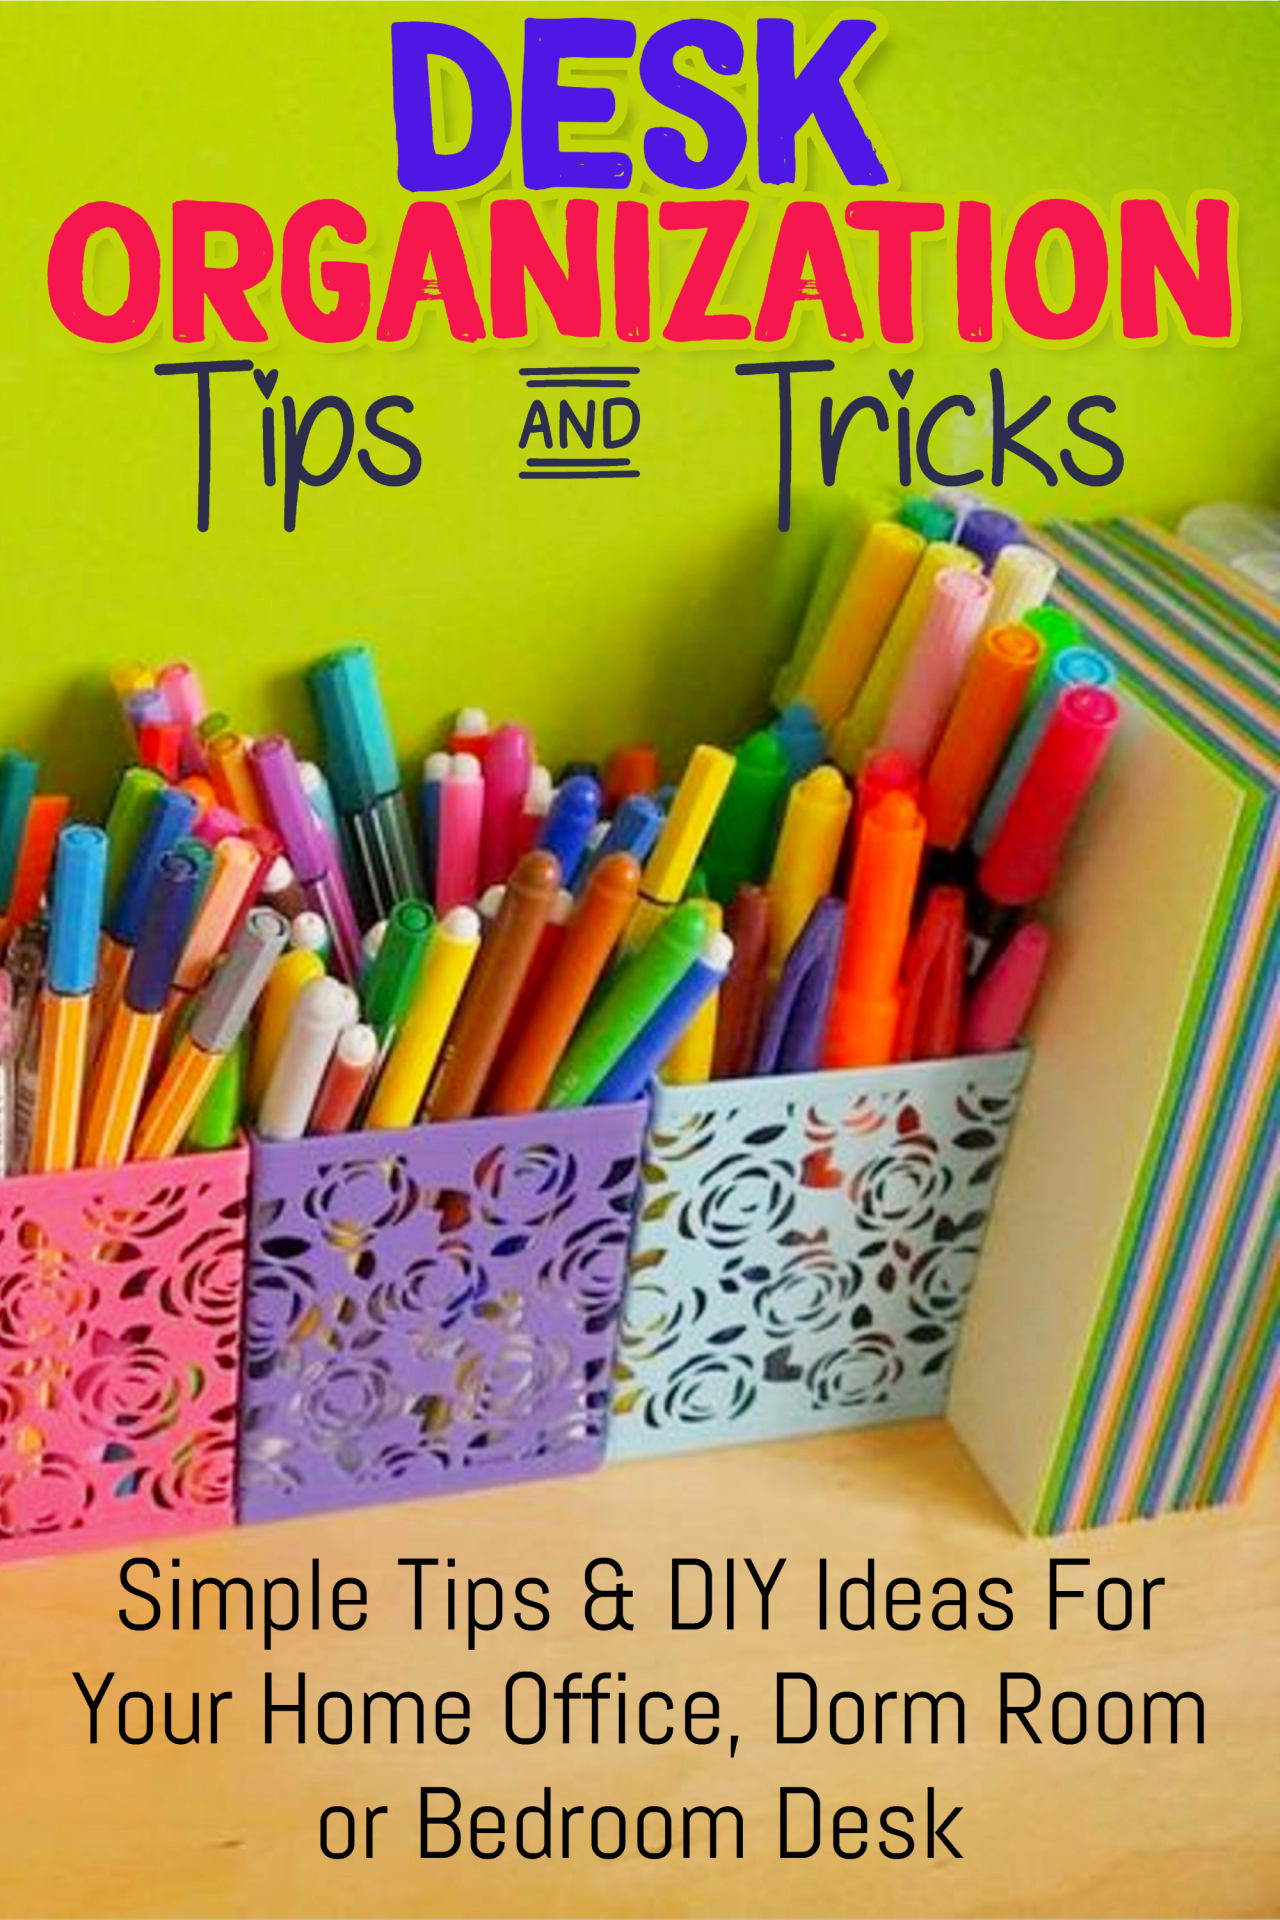 Bedroom and Home Office Desk Organization Ideas and LOTS of Simple Desk Organization Ideas For Your Home Office Desk, Bedroom Desk Ideas, Dorm Room Desk or ANY Desk. Cheap and easy DIY organization hacks for your desk work area - even desk storage ideas to get your desk organized and STAY organized.  See all desk organization ideas PICTURES here... 